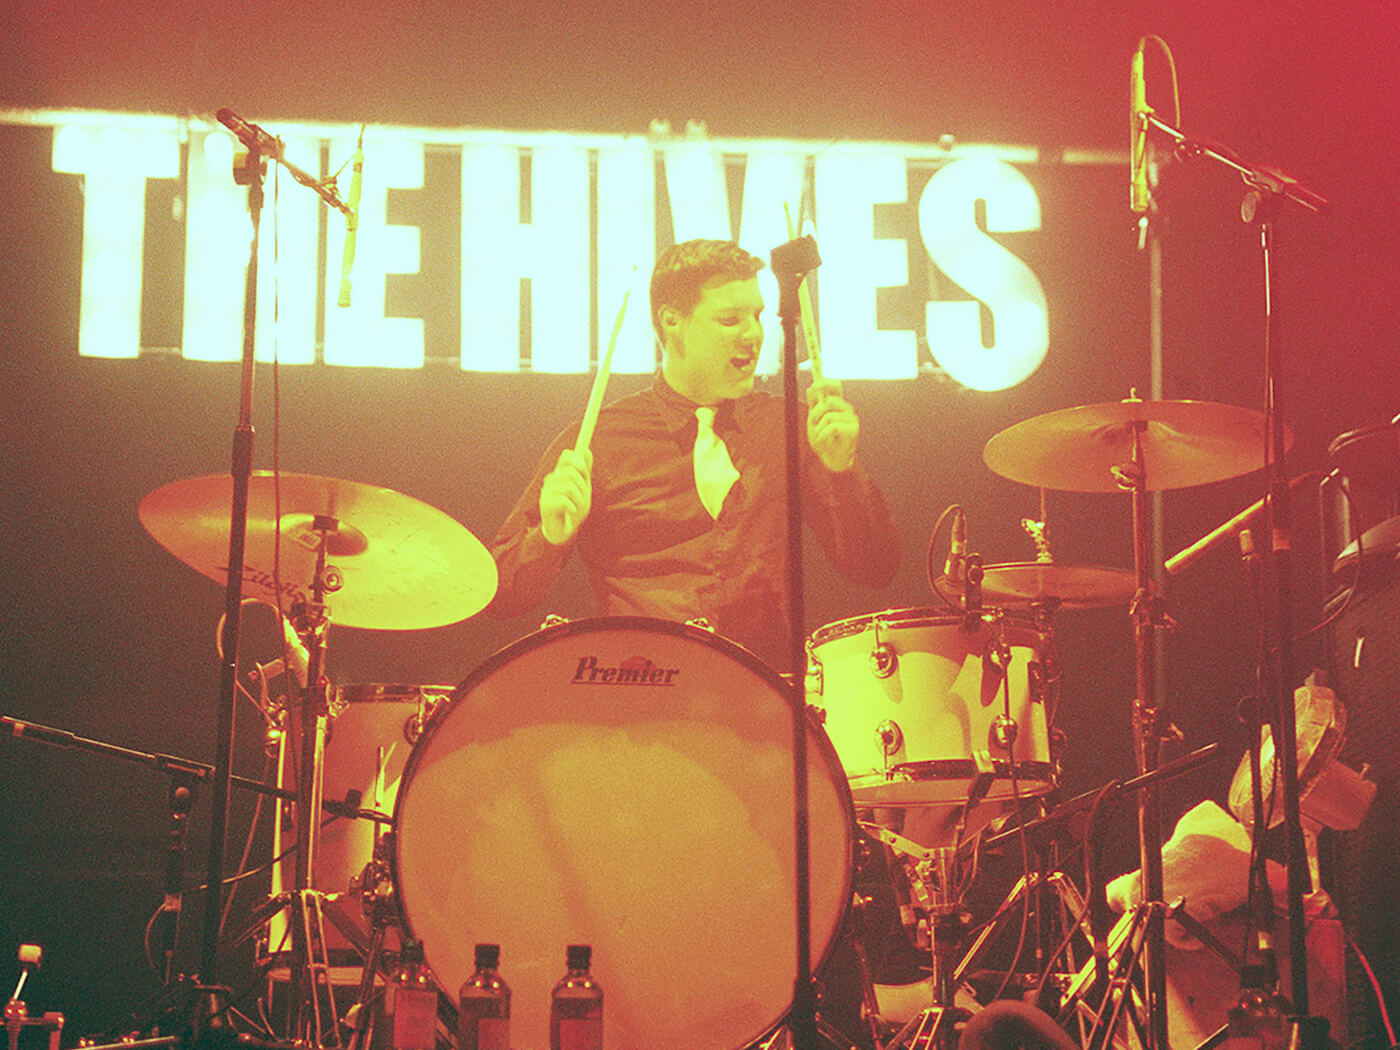 Chris Dangerous of the Hives performing at the Brixton Academy by rune hellestad/Corbis via Getty Images